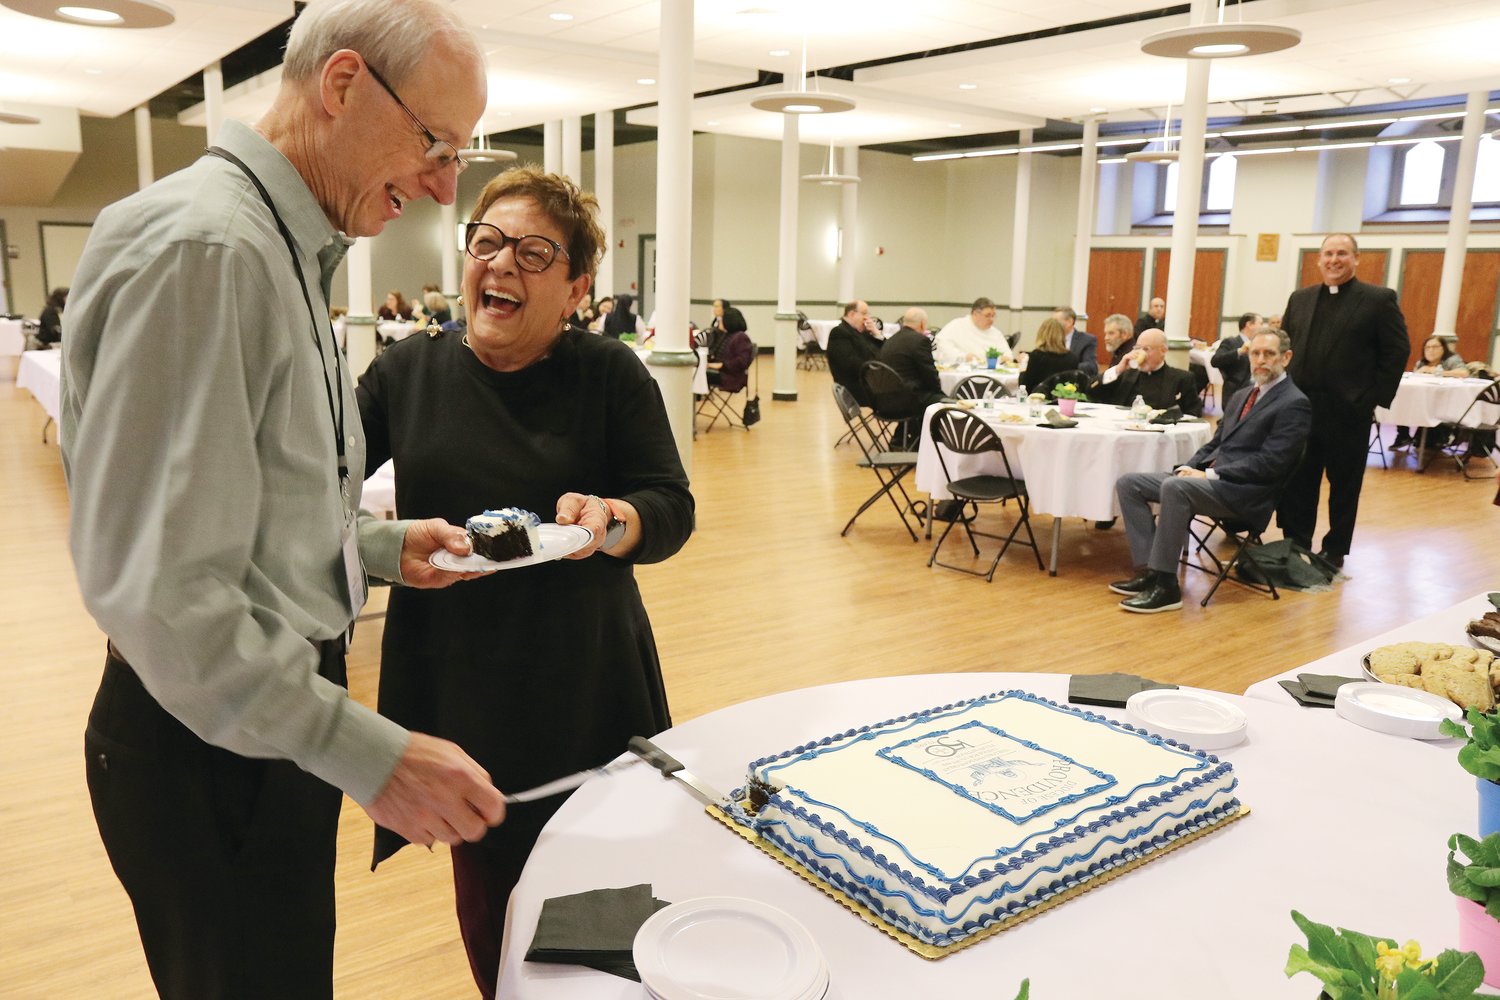 The longest and shortest serving employees cut the anniversary cake at the luncheon.